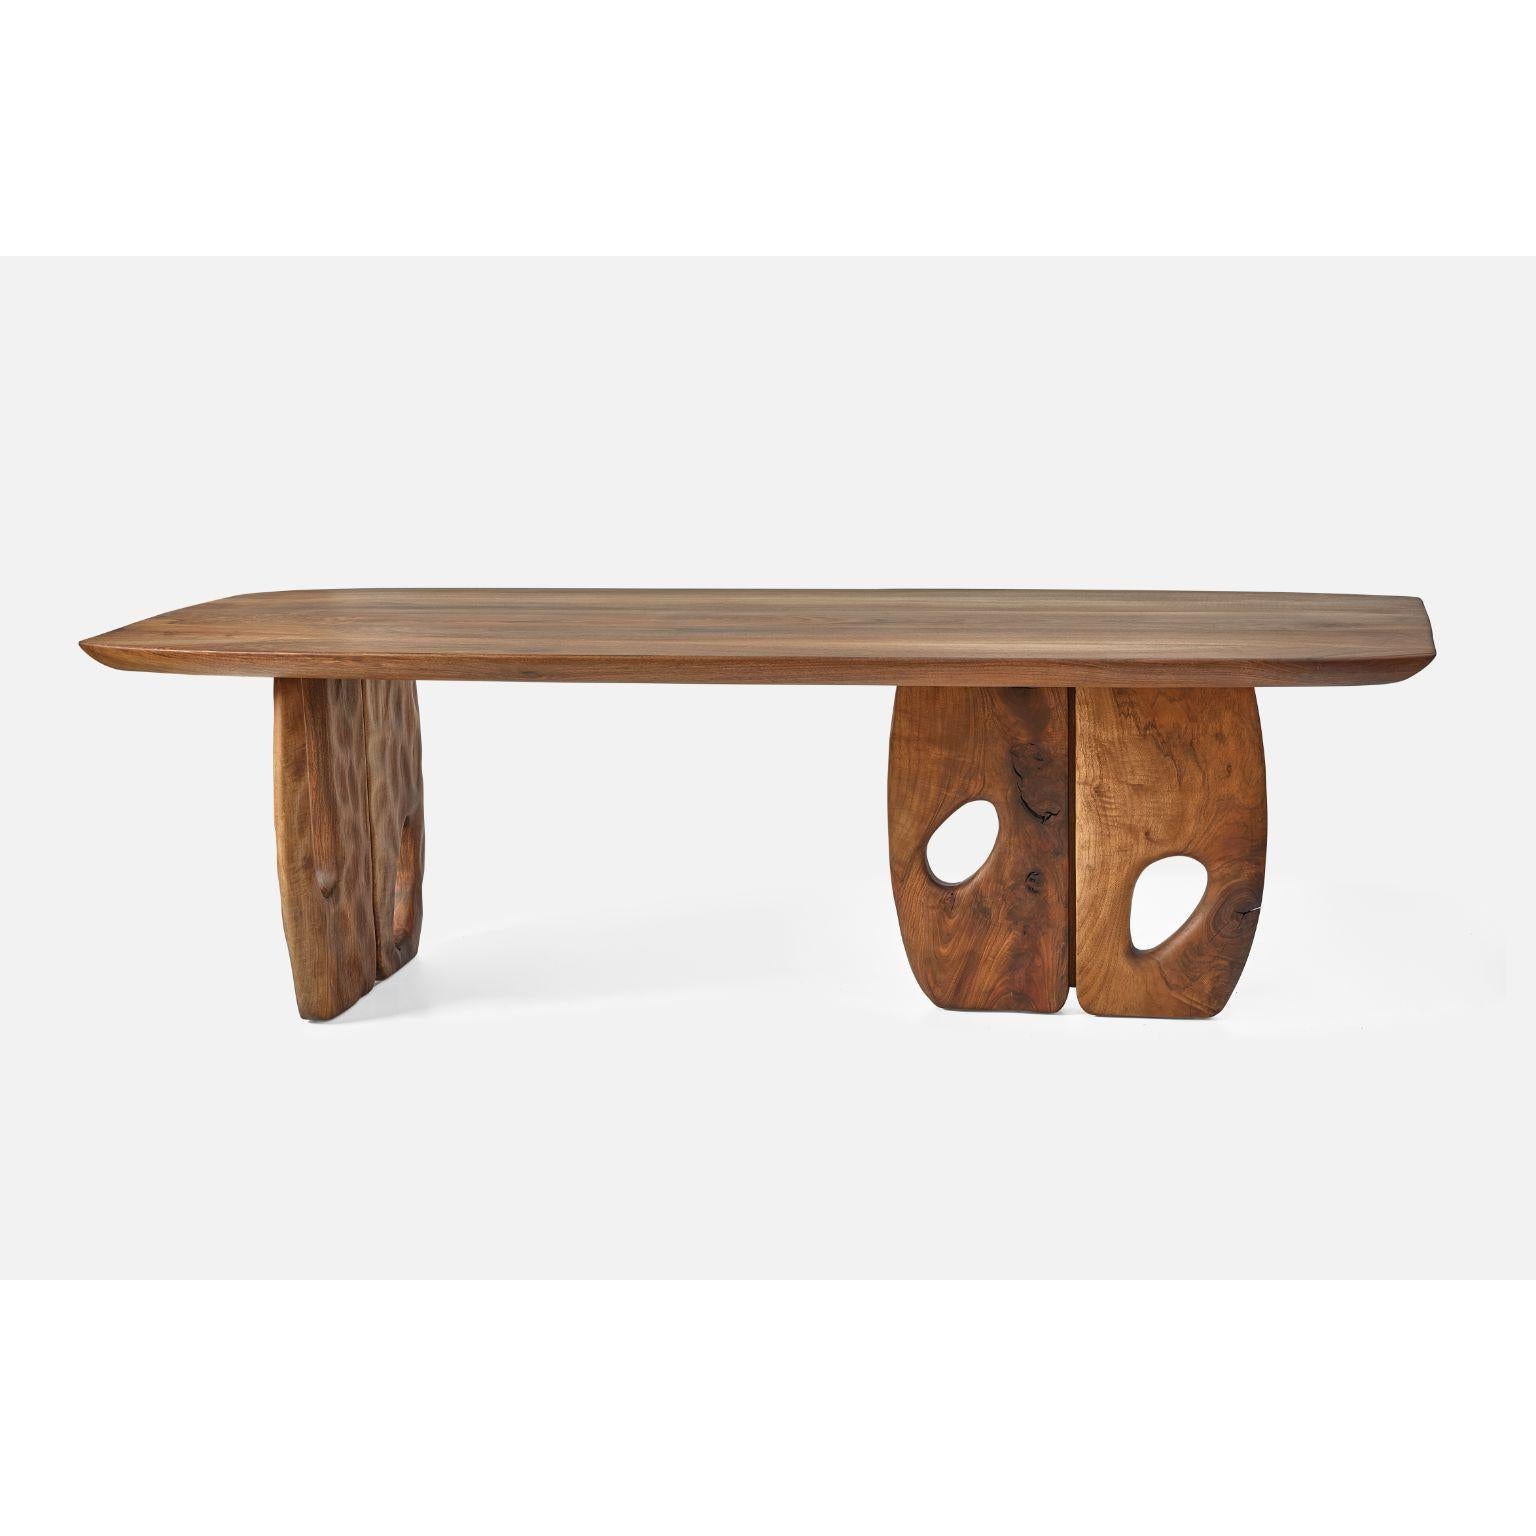 Kaya Dining Table M by Contemporary Ecowood
Dimensions: W 100 x D 244 x H 75 cm.
Materials: American Clora Walnut.
Color: Natural

Contemporary Ecowood’s story began in a craft workshop in 2009. Our wood passion made us focus on fallen trees in the